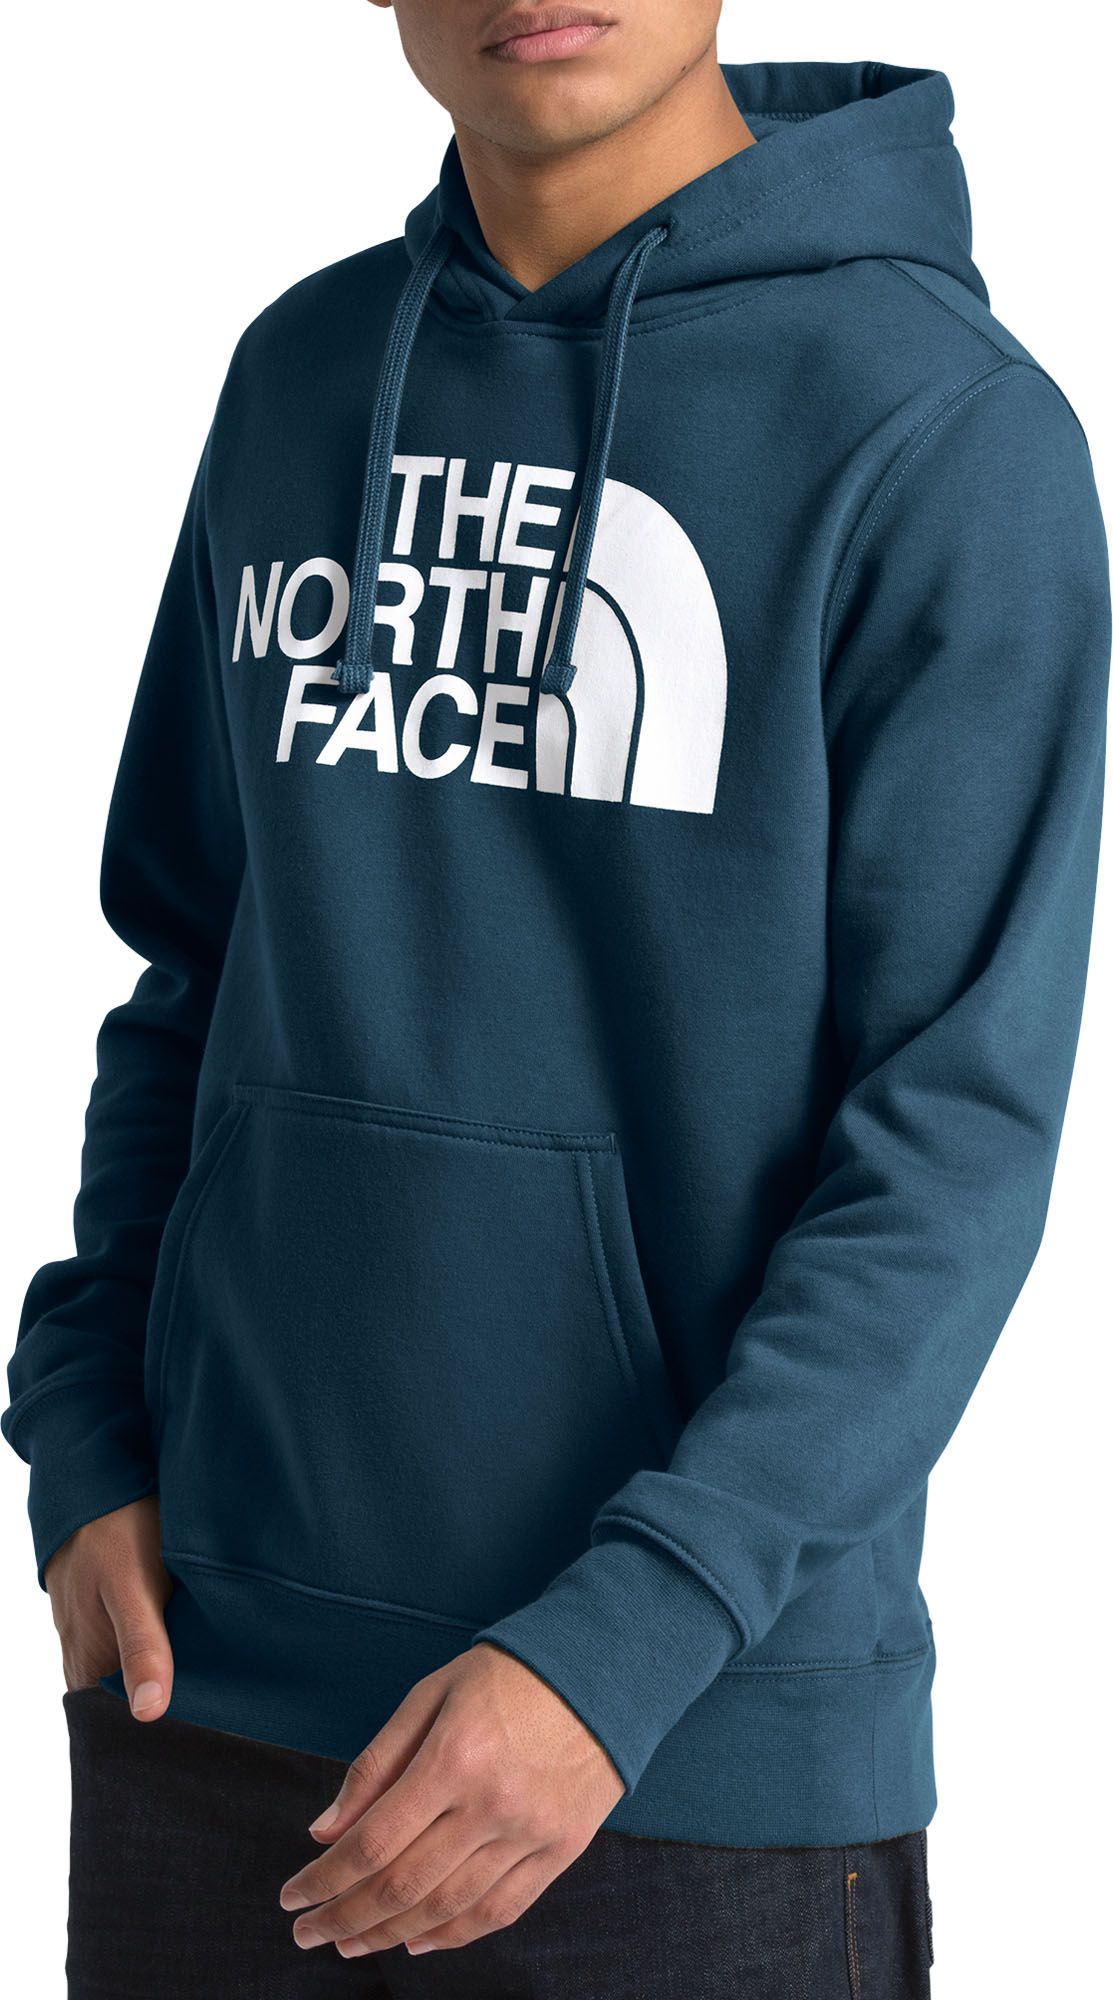 The North Face Men's Half Dome Hoodie Entire Collection, 40% OFF 